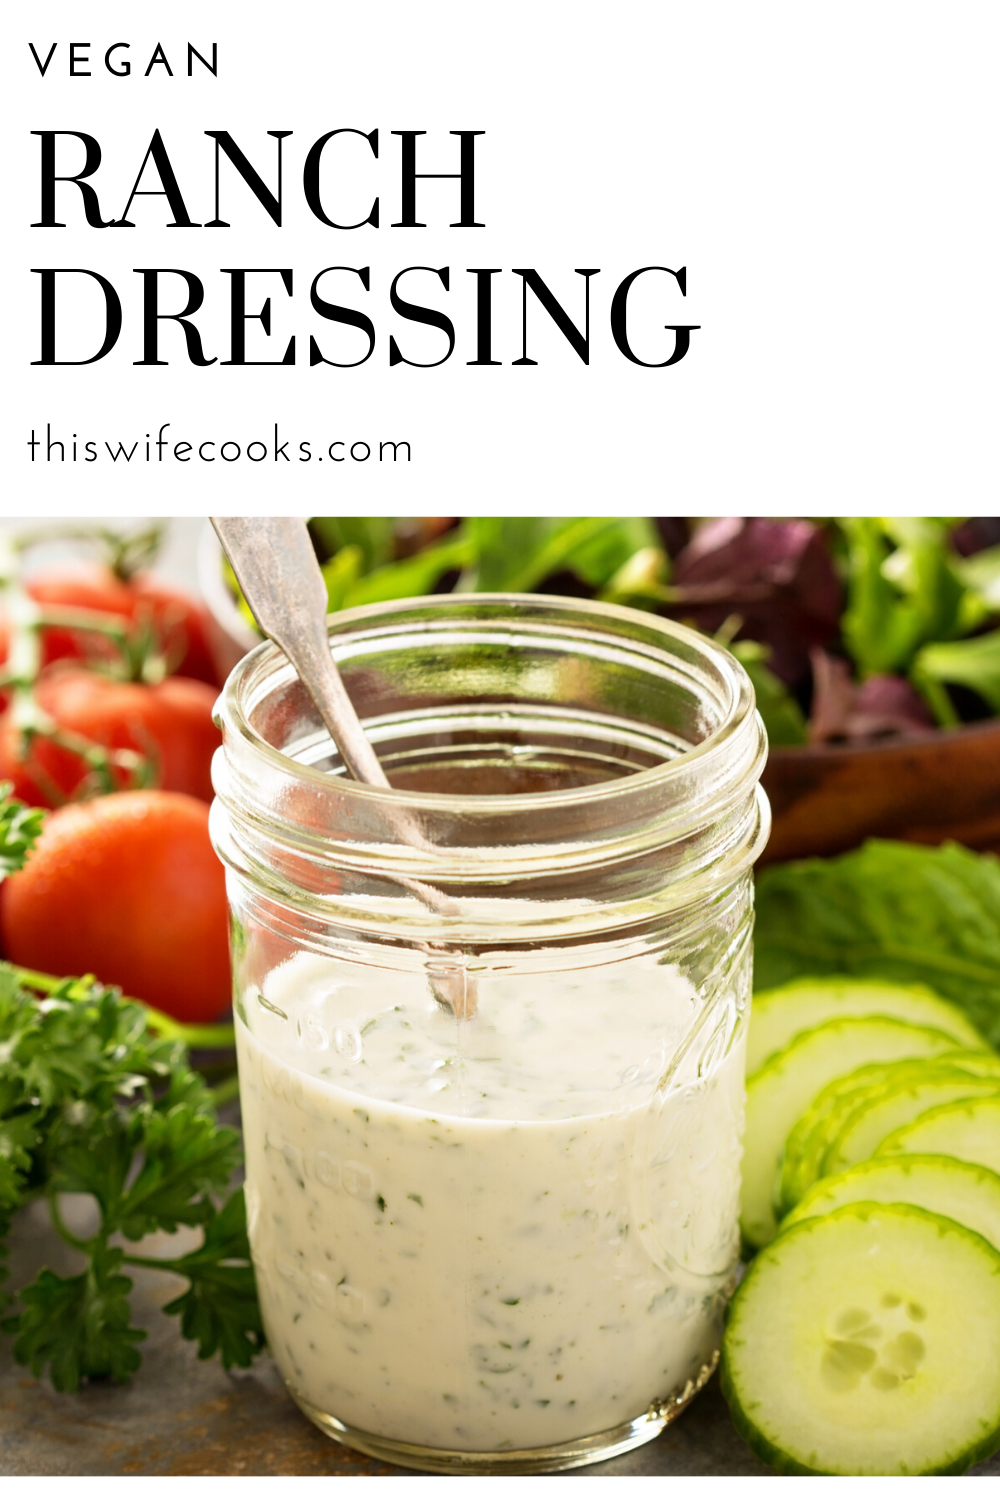 Easy Vegan Ranch Dressing - Six simple ingredients and all the classic ranch flavor you love in an easy to make dressing and dip. via @thiswifecooks